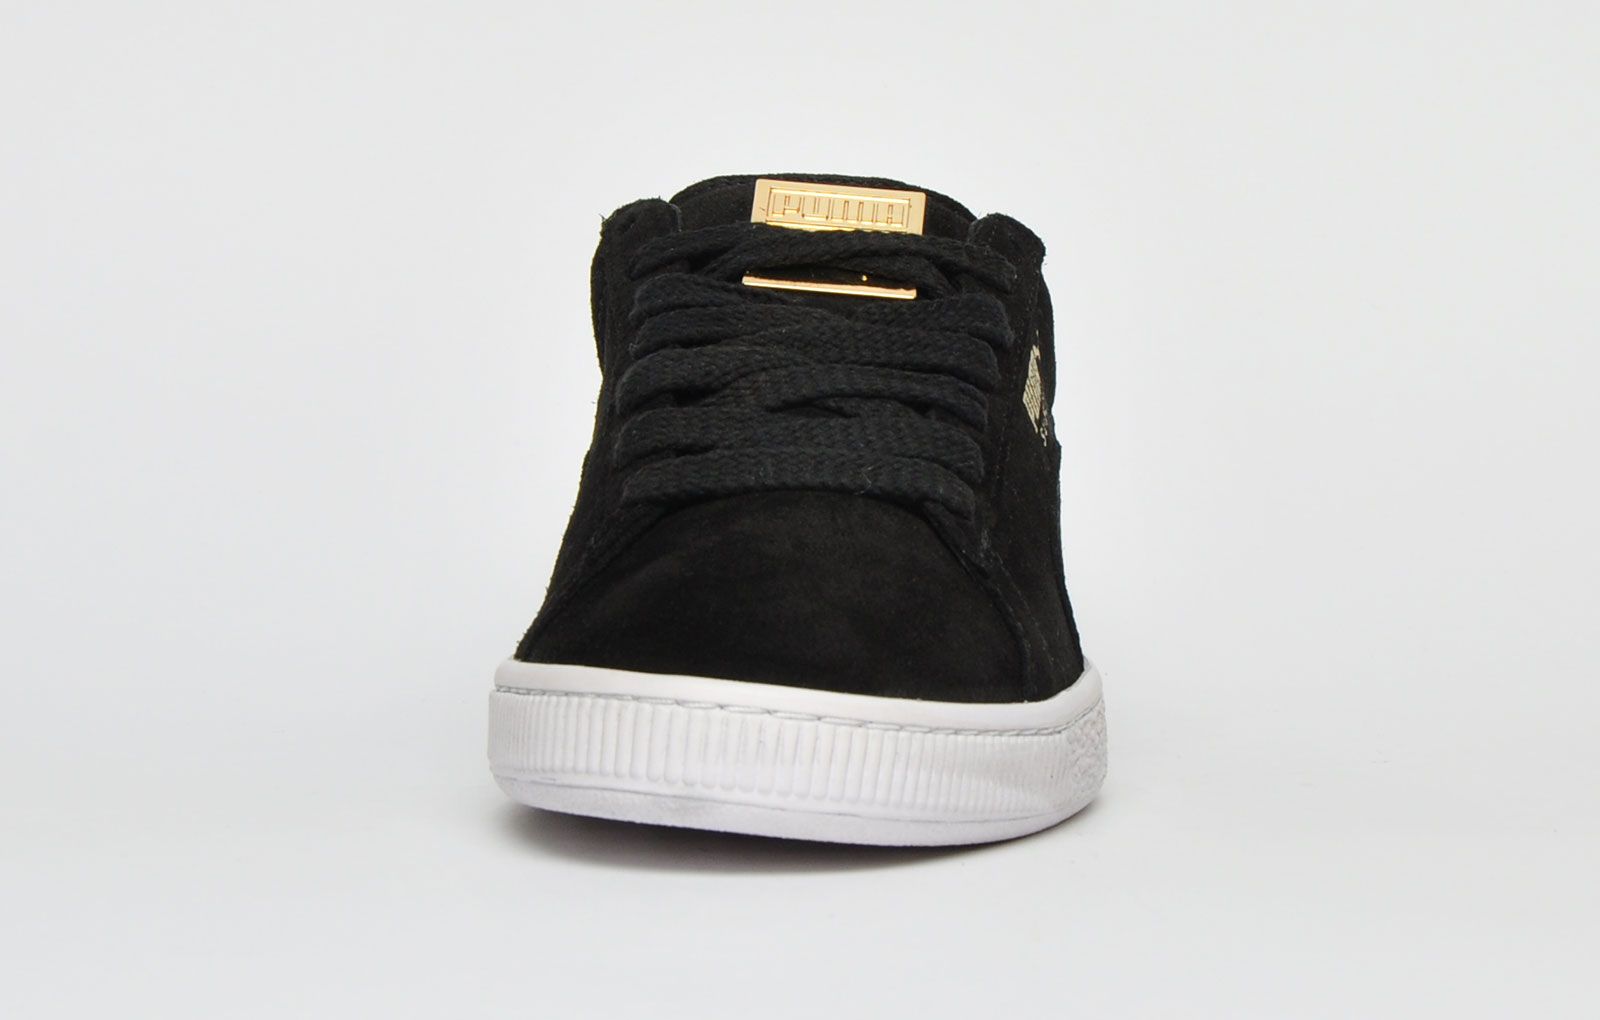 <p>This Puma Classic Suede MB is a truly stunning trainer, manufactured to Pumas highest specifications for that retro feel and look and in a plush finish throughout updated with a metal badge to the tongue and a contrasting gold-foil Puma Suede Logo on the lateral side.</p> <p>These suede’s have a padded heel and ankle collar for a comfortable fit and feature a contrasting textured vintage styled midsole well suited to the rigors of an active lifestyle. </p> <p>- Premium Suede leather upper </p> <p>- Secure lace up system </p> <p>- Additional cushioning and added ankle support </p> <p>- Durable vintage styled outsole with treaded design for added grip </p> <p>- Puma branding throughout</p>